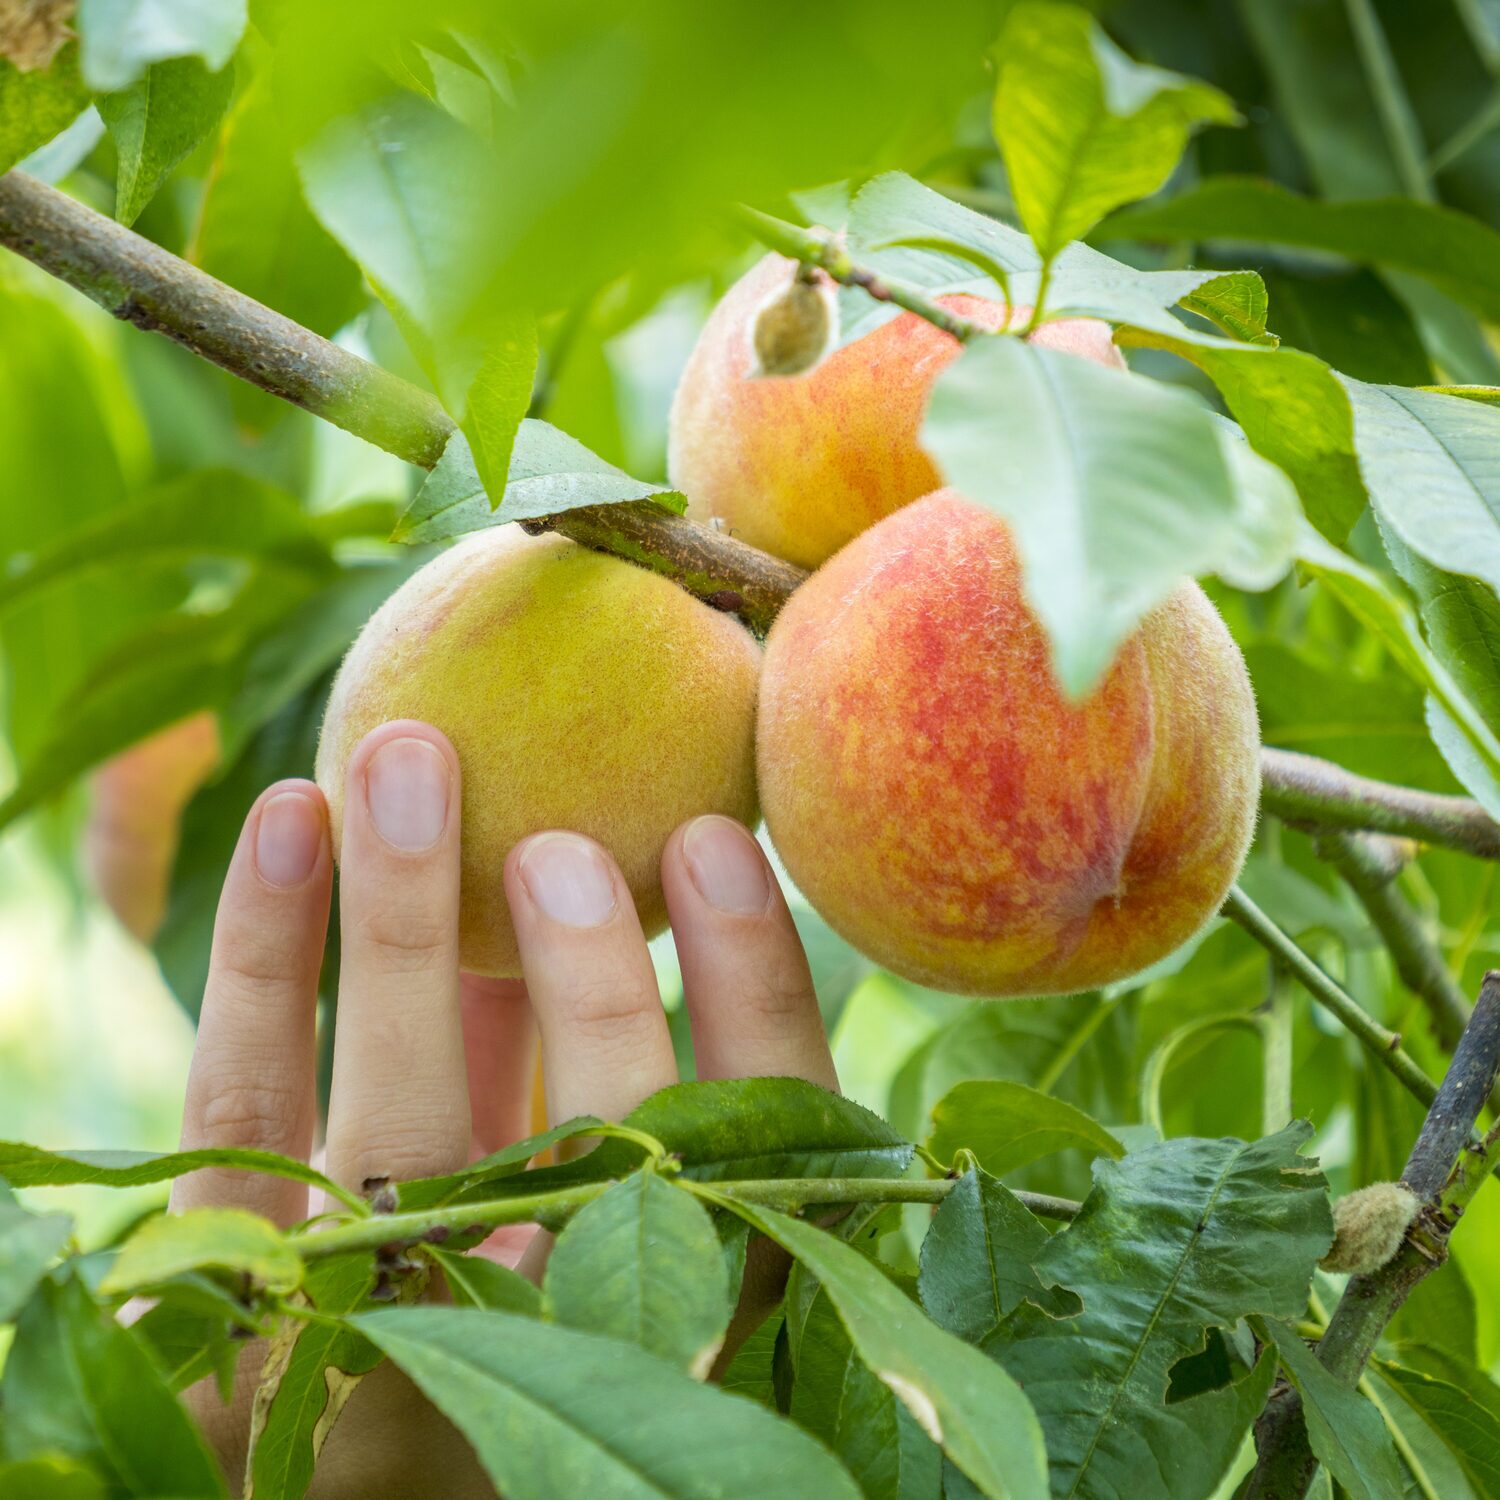 Peaches grown on tried being picked by a hand. 